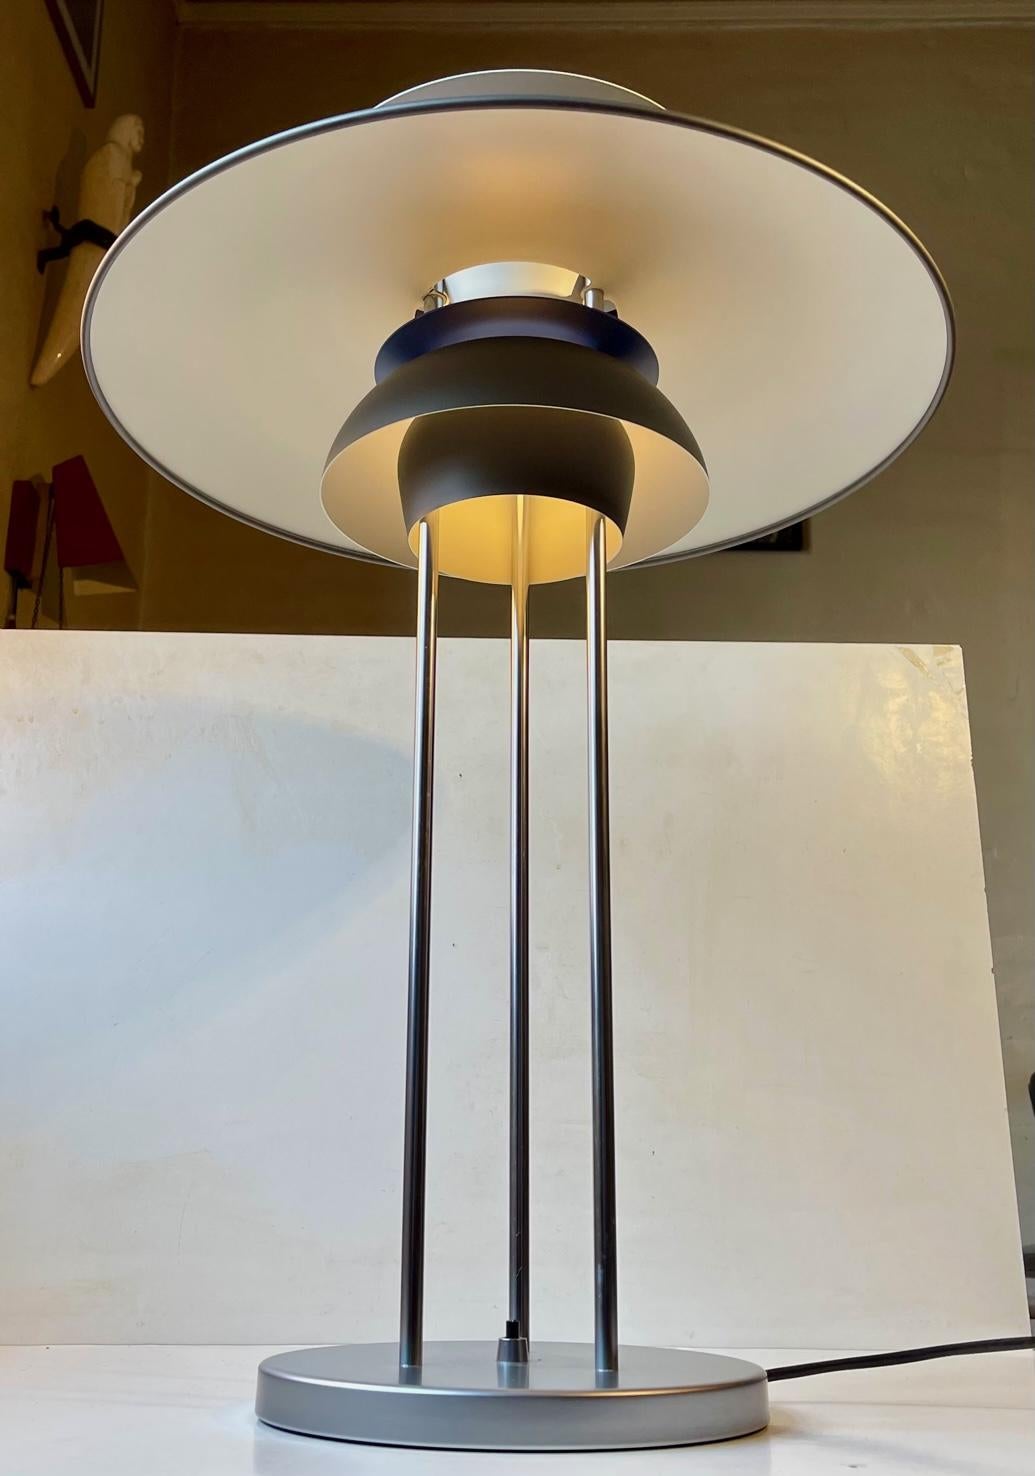 A large and pristine example of the PH5 table or desk lamp designed by Poul Henningsen in 1962. This vintage piece is an excellent representation of Henningsen's larger PH series, all based on the idea of using multiple shades and diffusers to